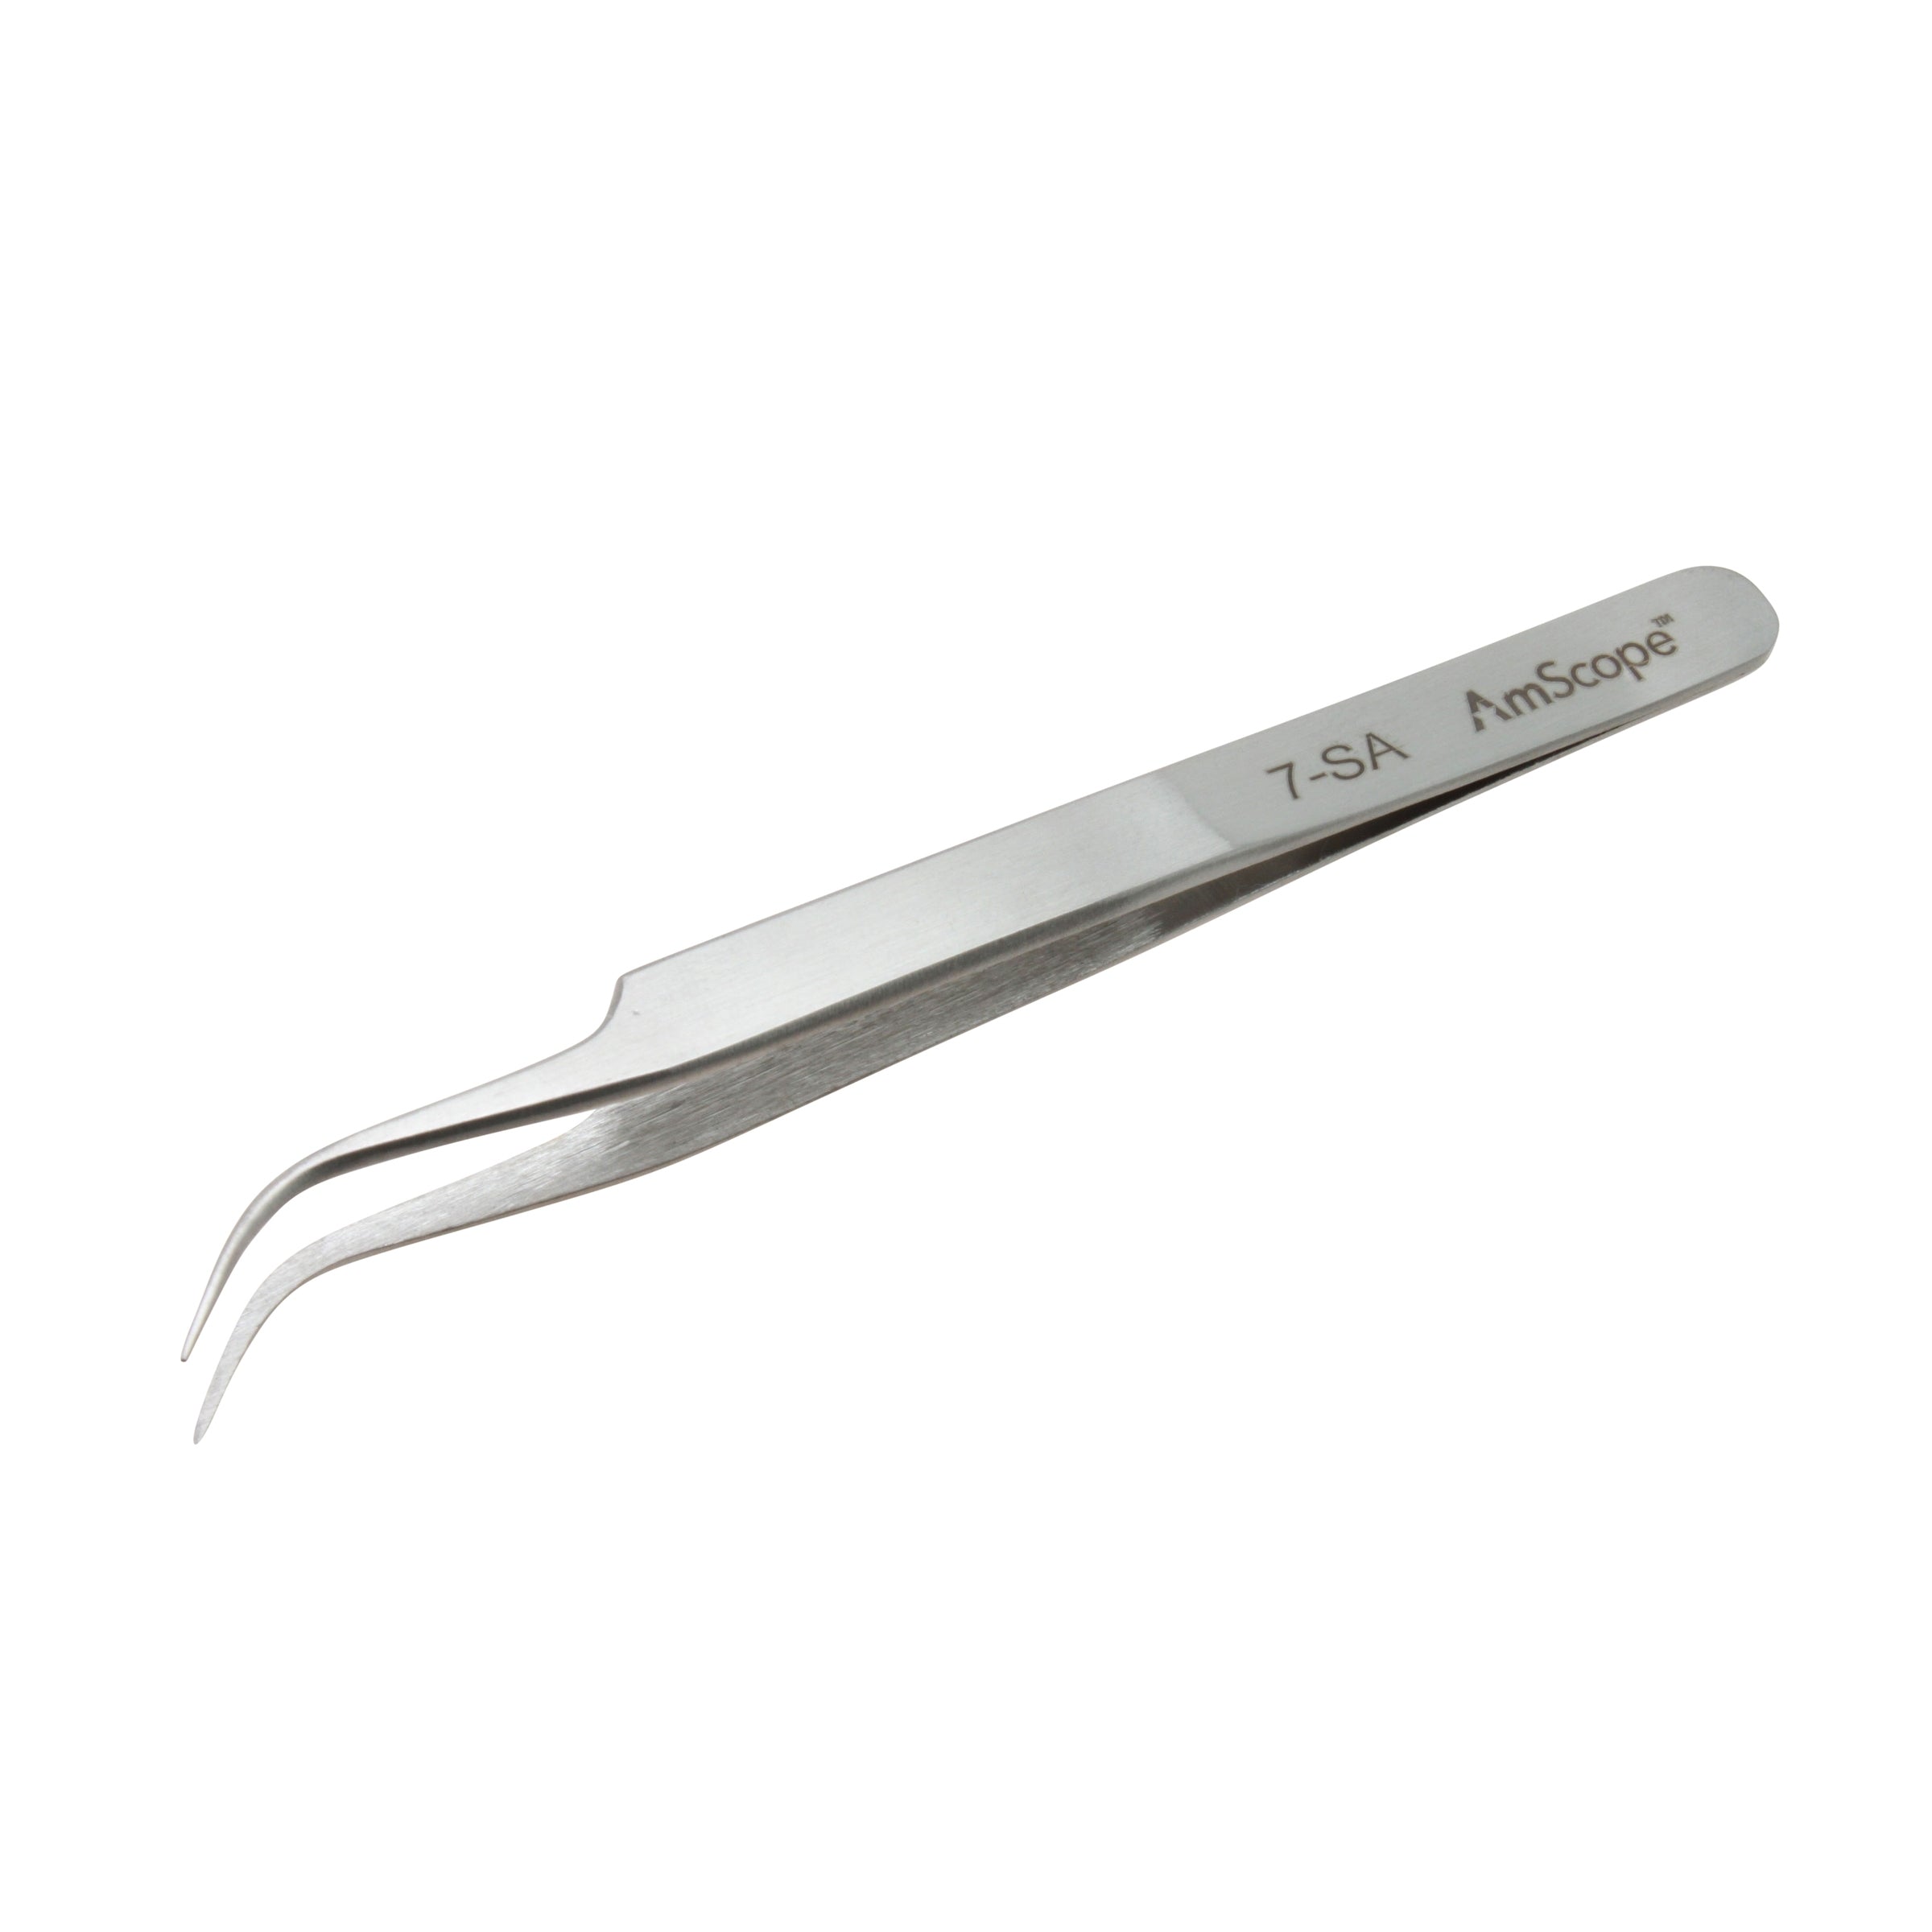 Amscope TW-050 High Precision 4 1/2 in. Curved Flat Tip Tweezers